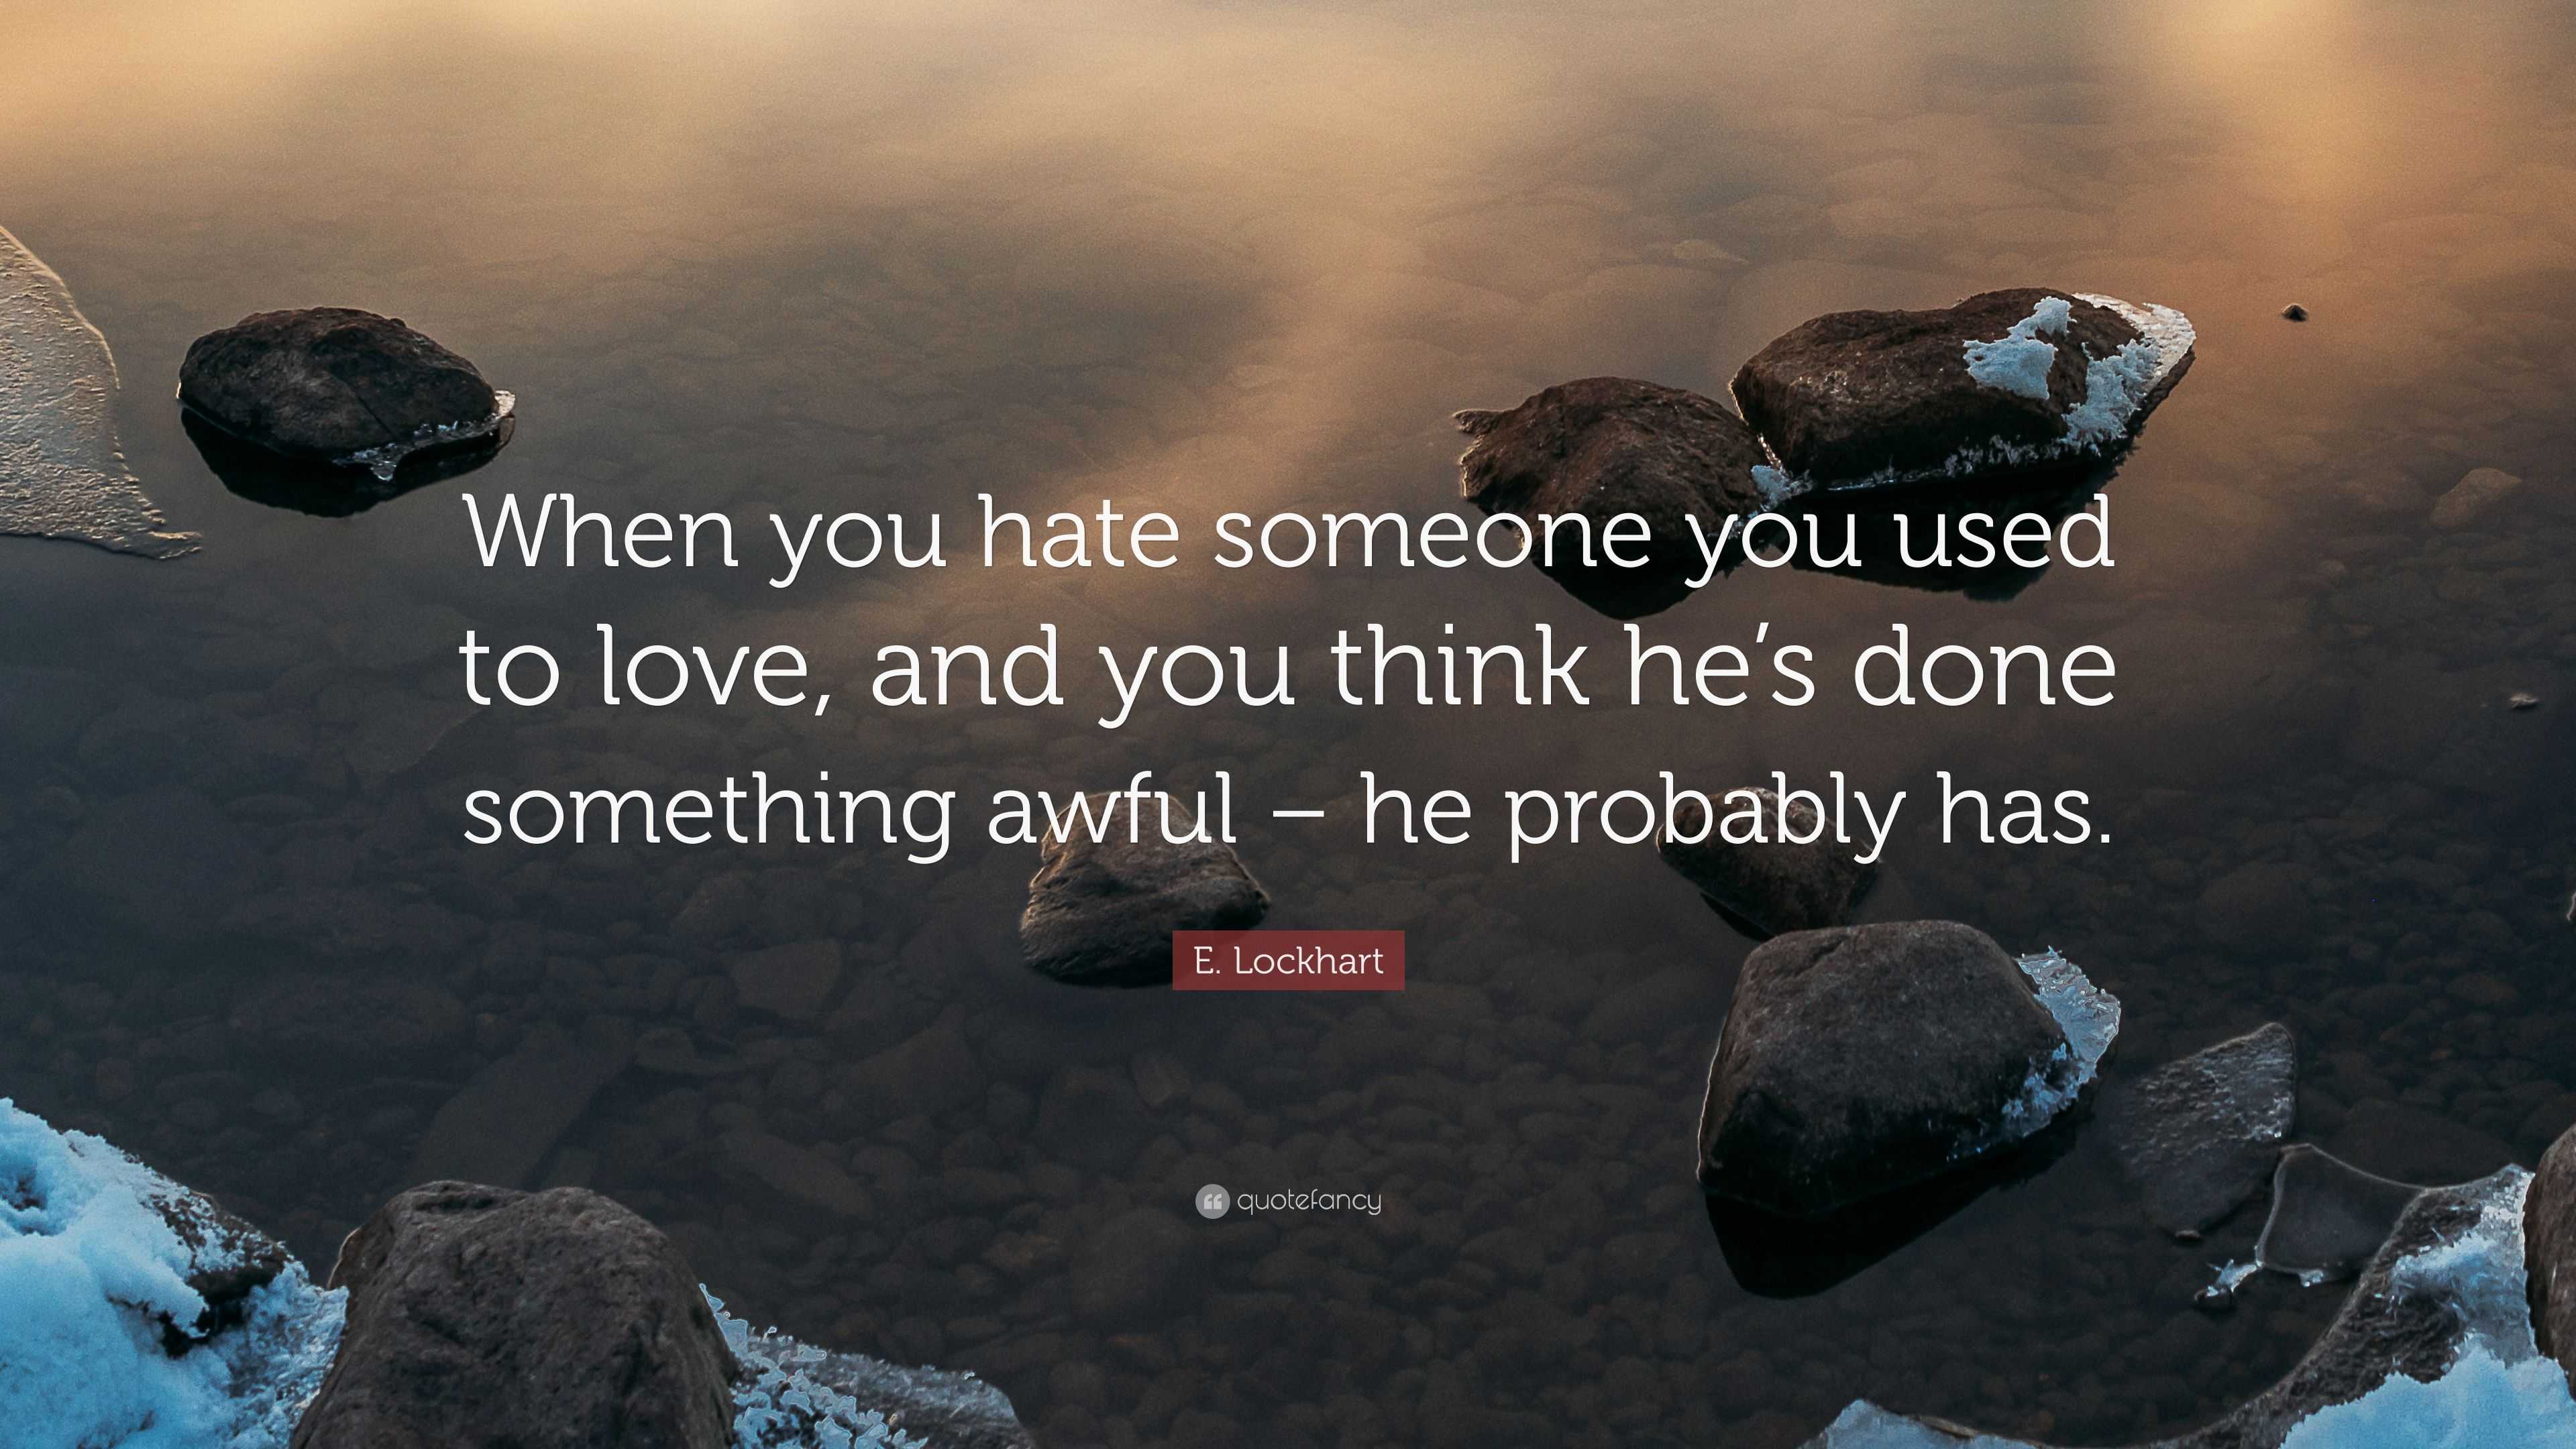 E Lockhart Quote “When you hate someone you used to love and